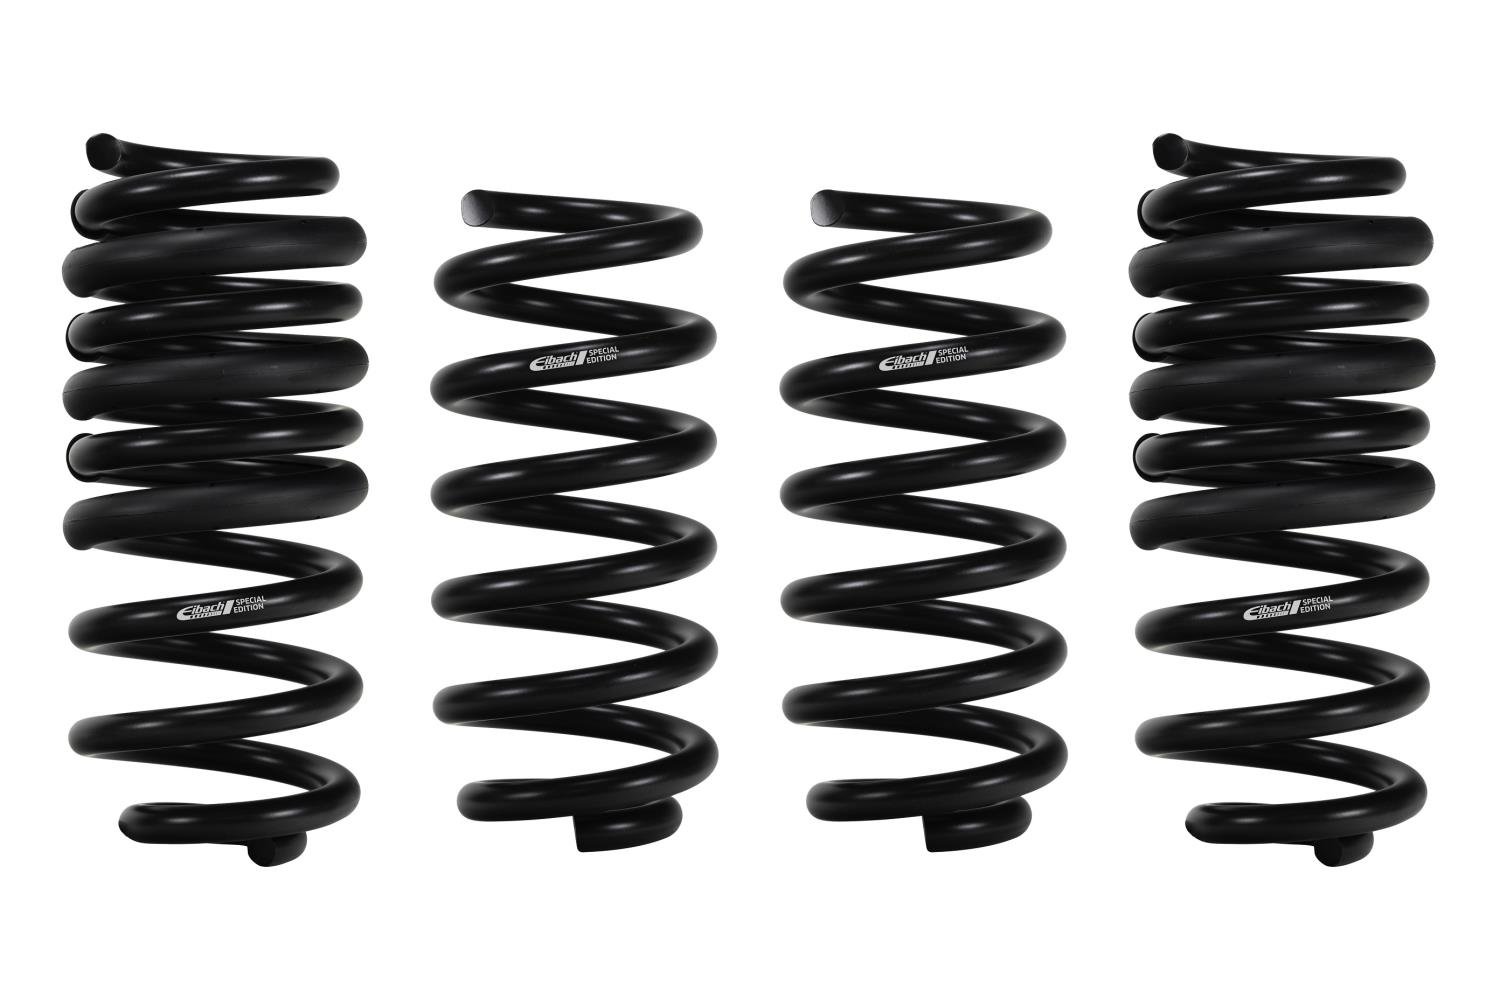 E10-27-013-01-22 Special Edition Pro-Kit Performance Lowering Springs Fits Dodge Durango SRT Hellcat 6.2L Supercharged (SC)